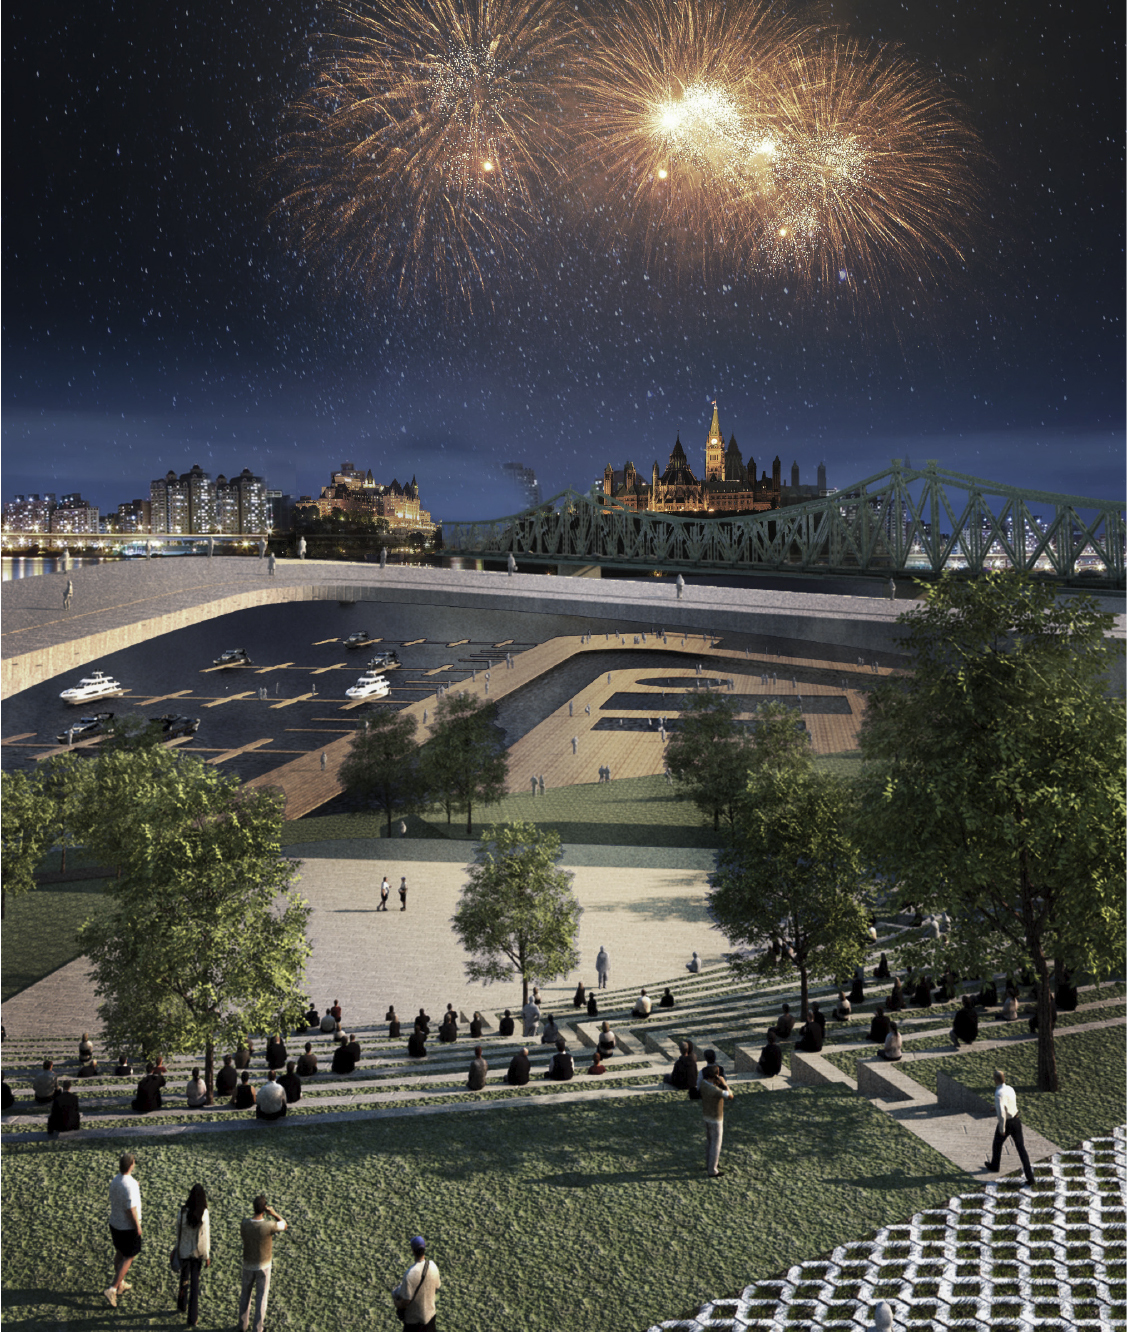 People sitting in the Jacques-Cartier Park amphitheatre beside a marina, with the Alexandra Bridge and Parliament Hill in the background, and a fireworks display in the sky.